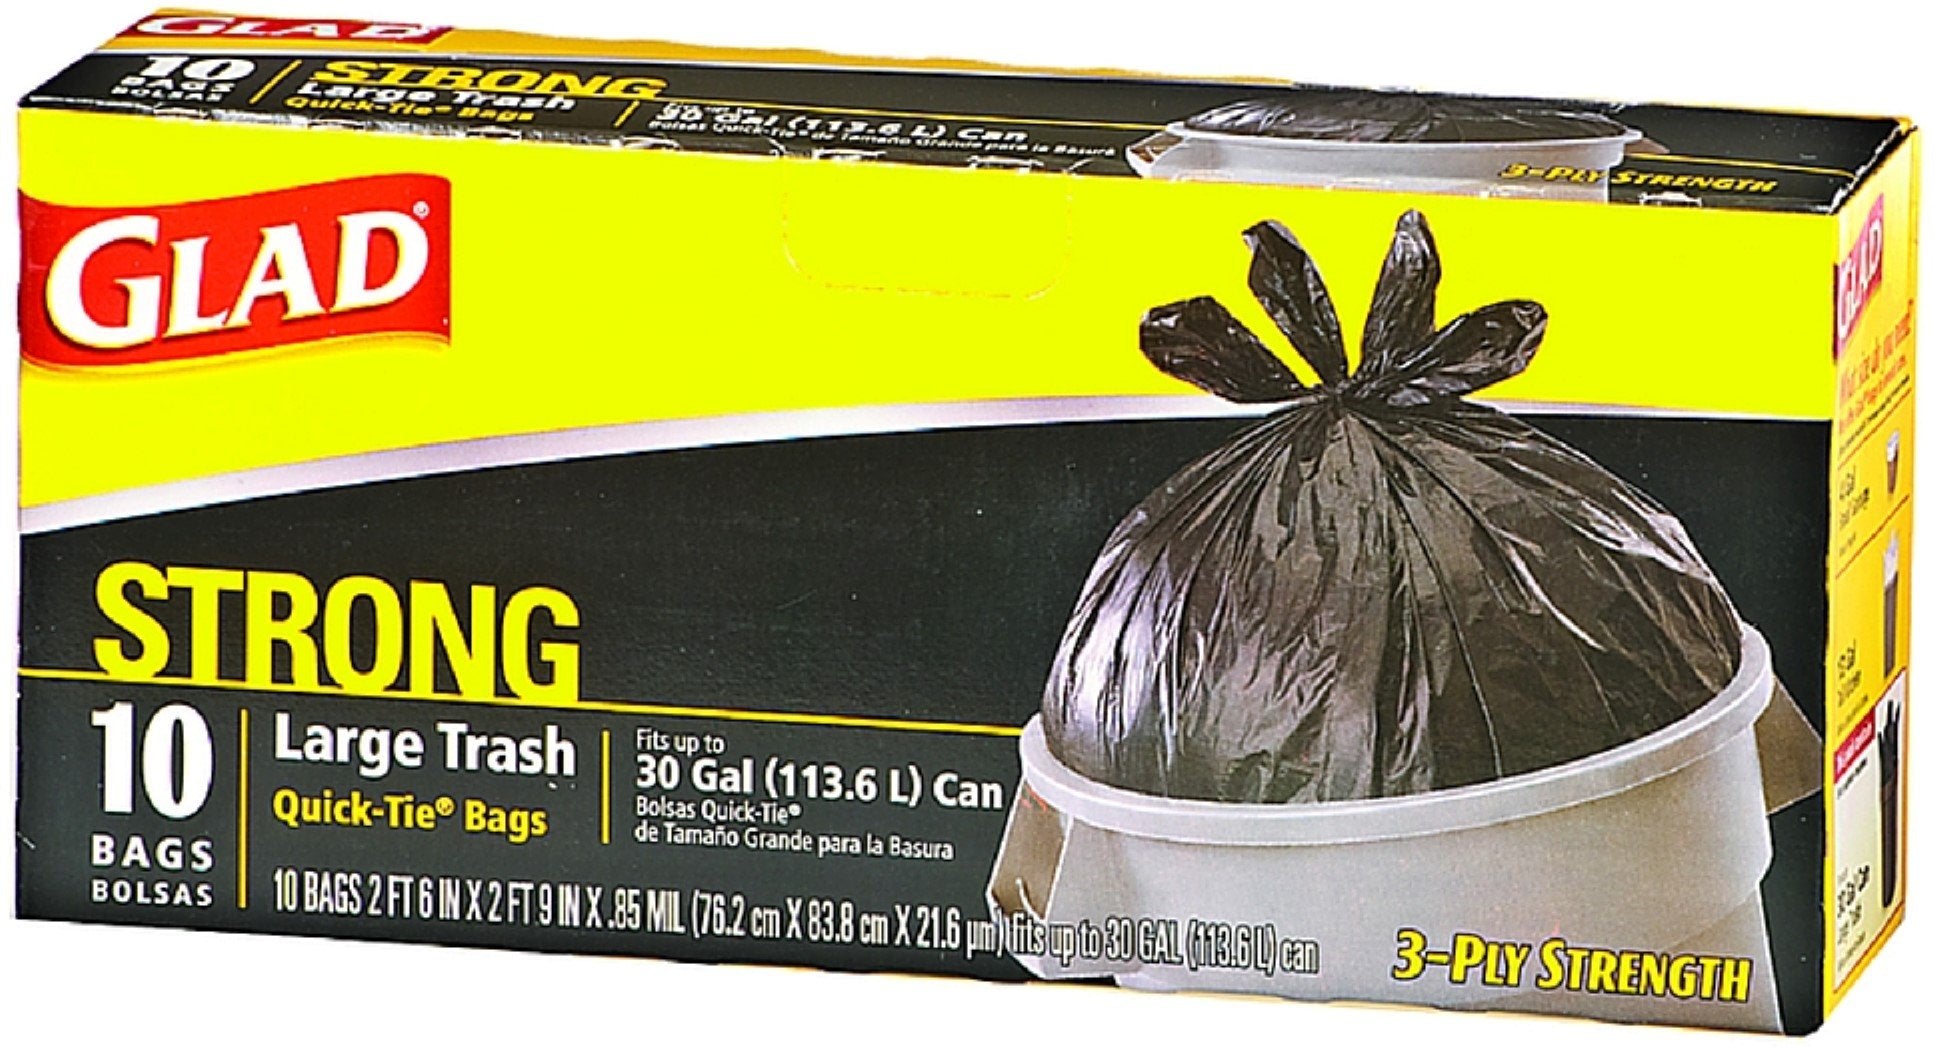 Glad - Large Quick-Tie Trash Bags, 30 Gallon, Black, 10 Pack - Case of 12